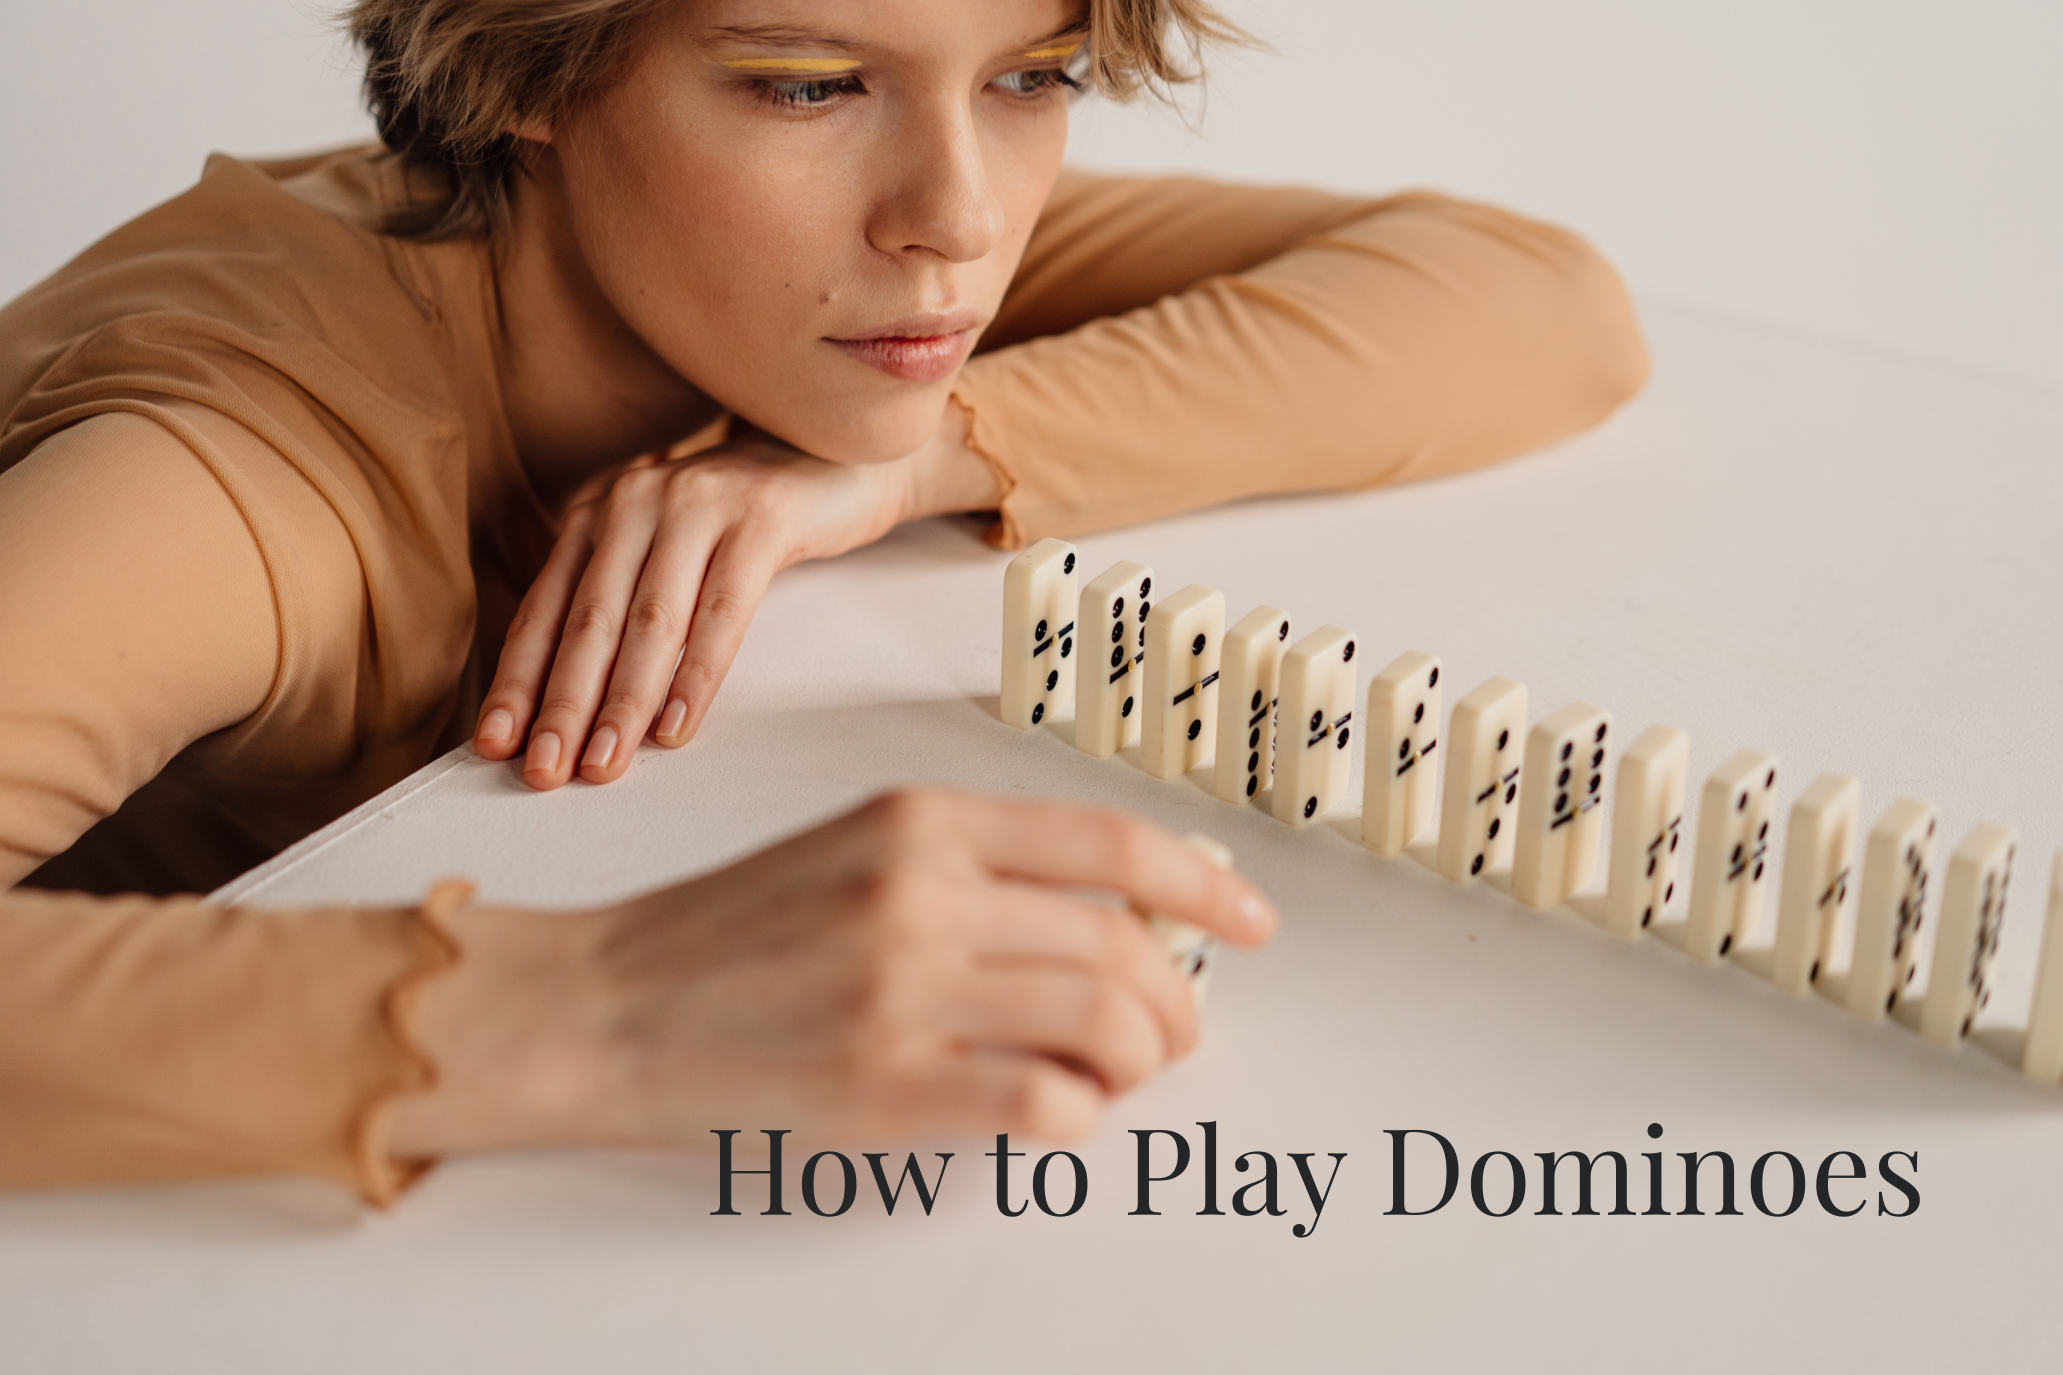 How to Play Dominoes 